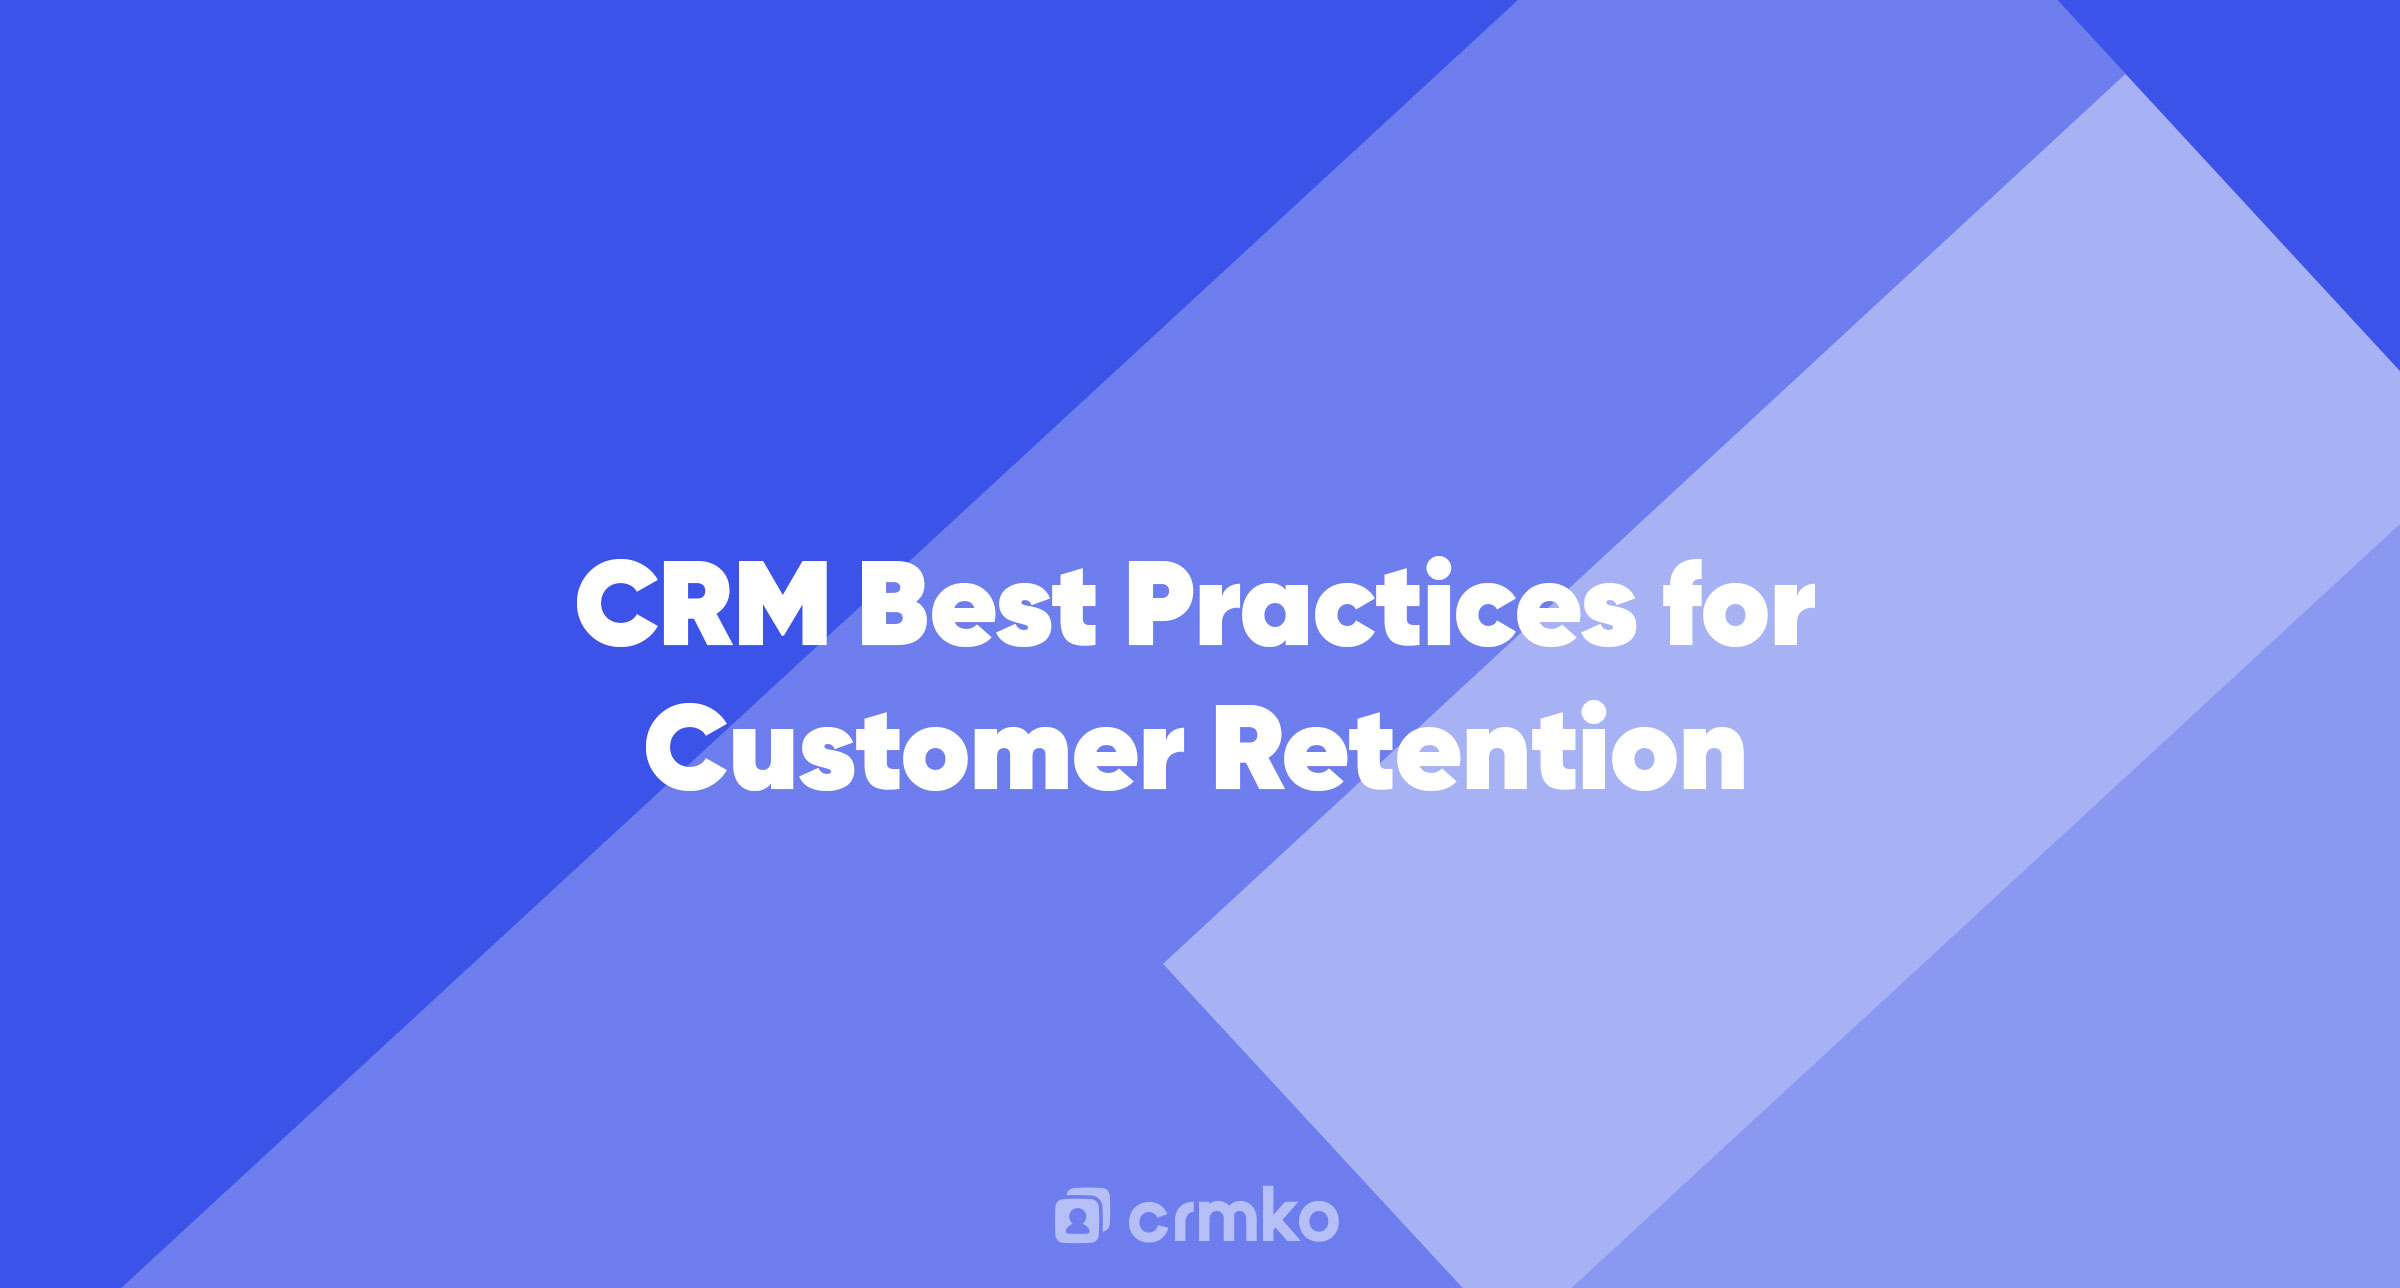 Article | CRM Best Practices for Customer Retention